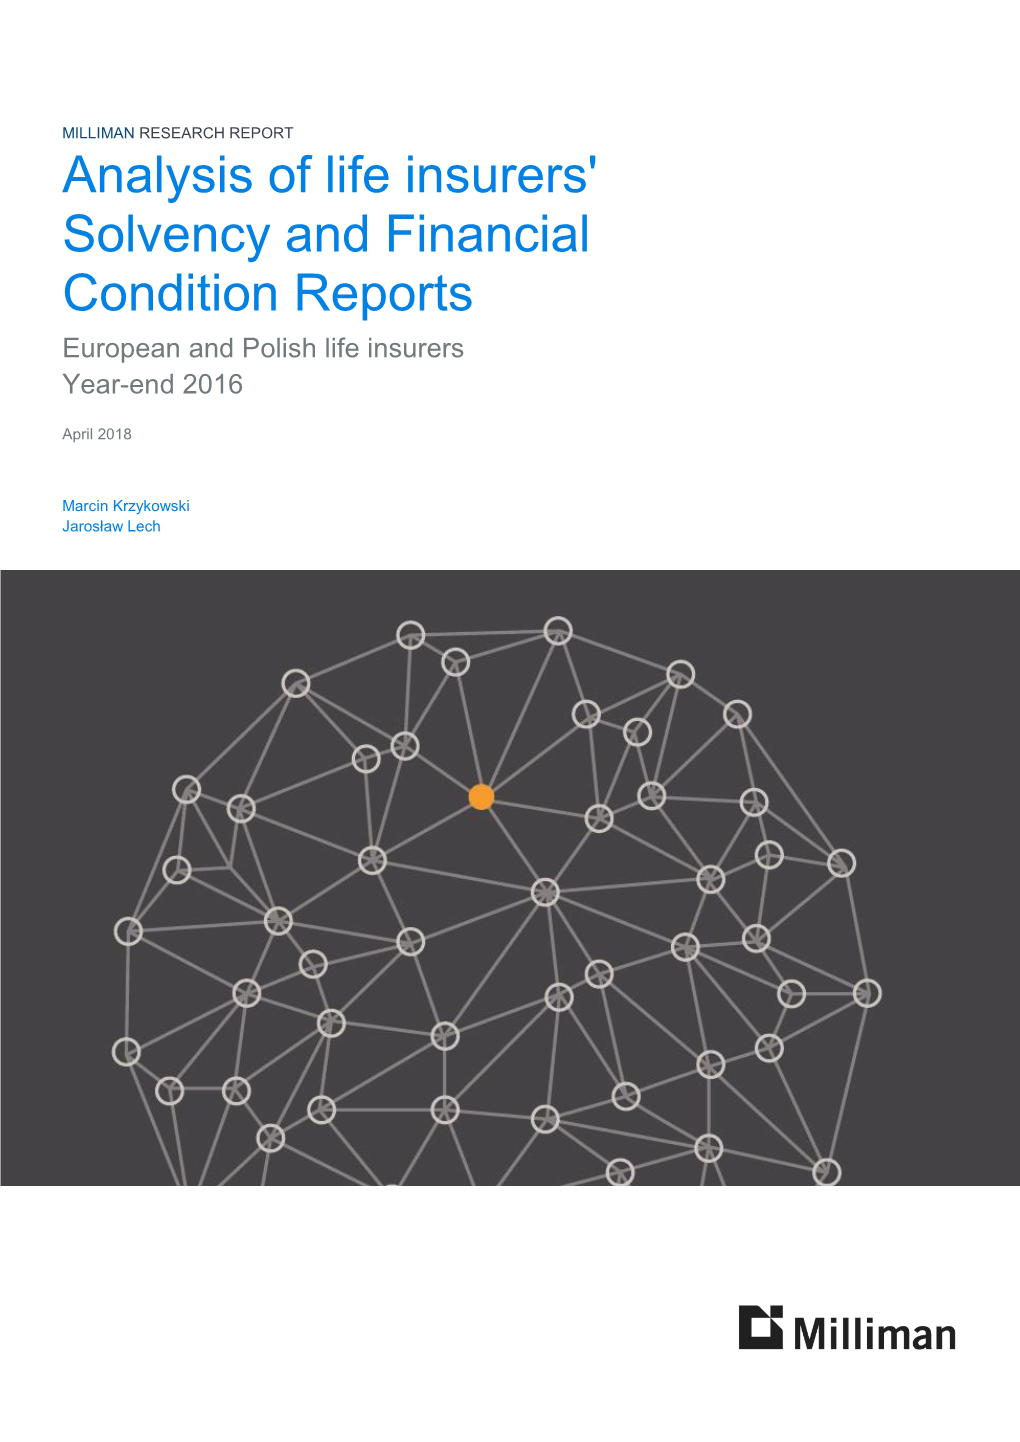 Analysis of Life Insurers' Solvency and Financial Condition Reports European and Polish Life Insurers Year-End 2016